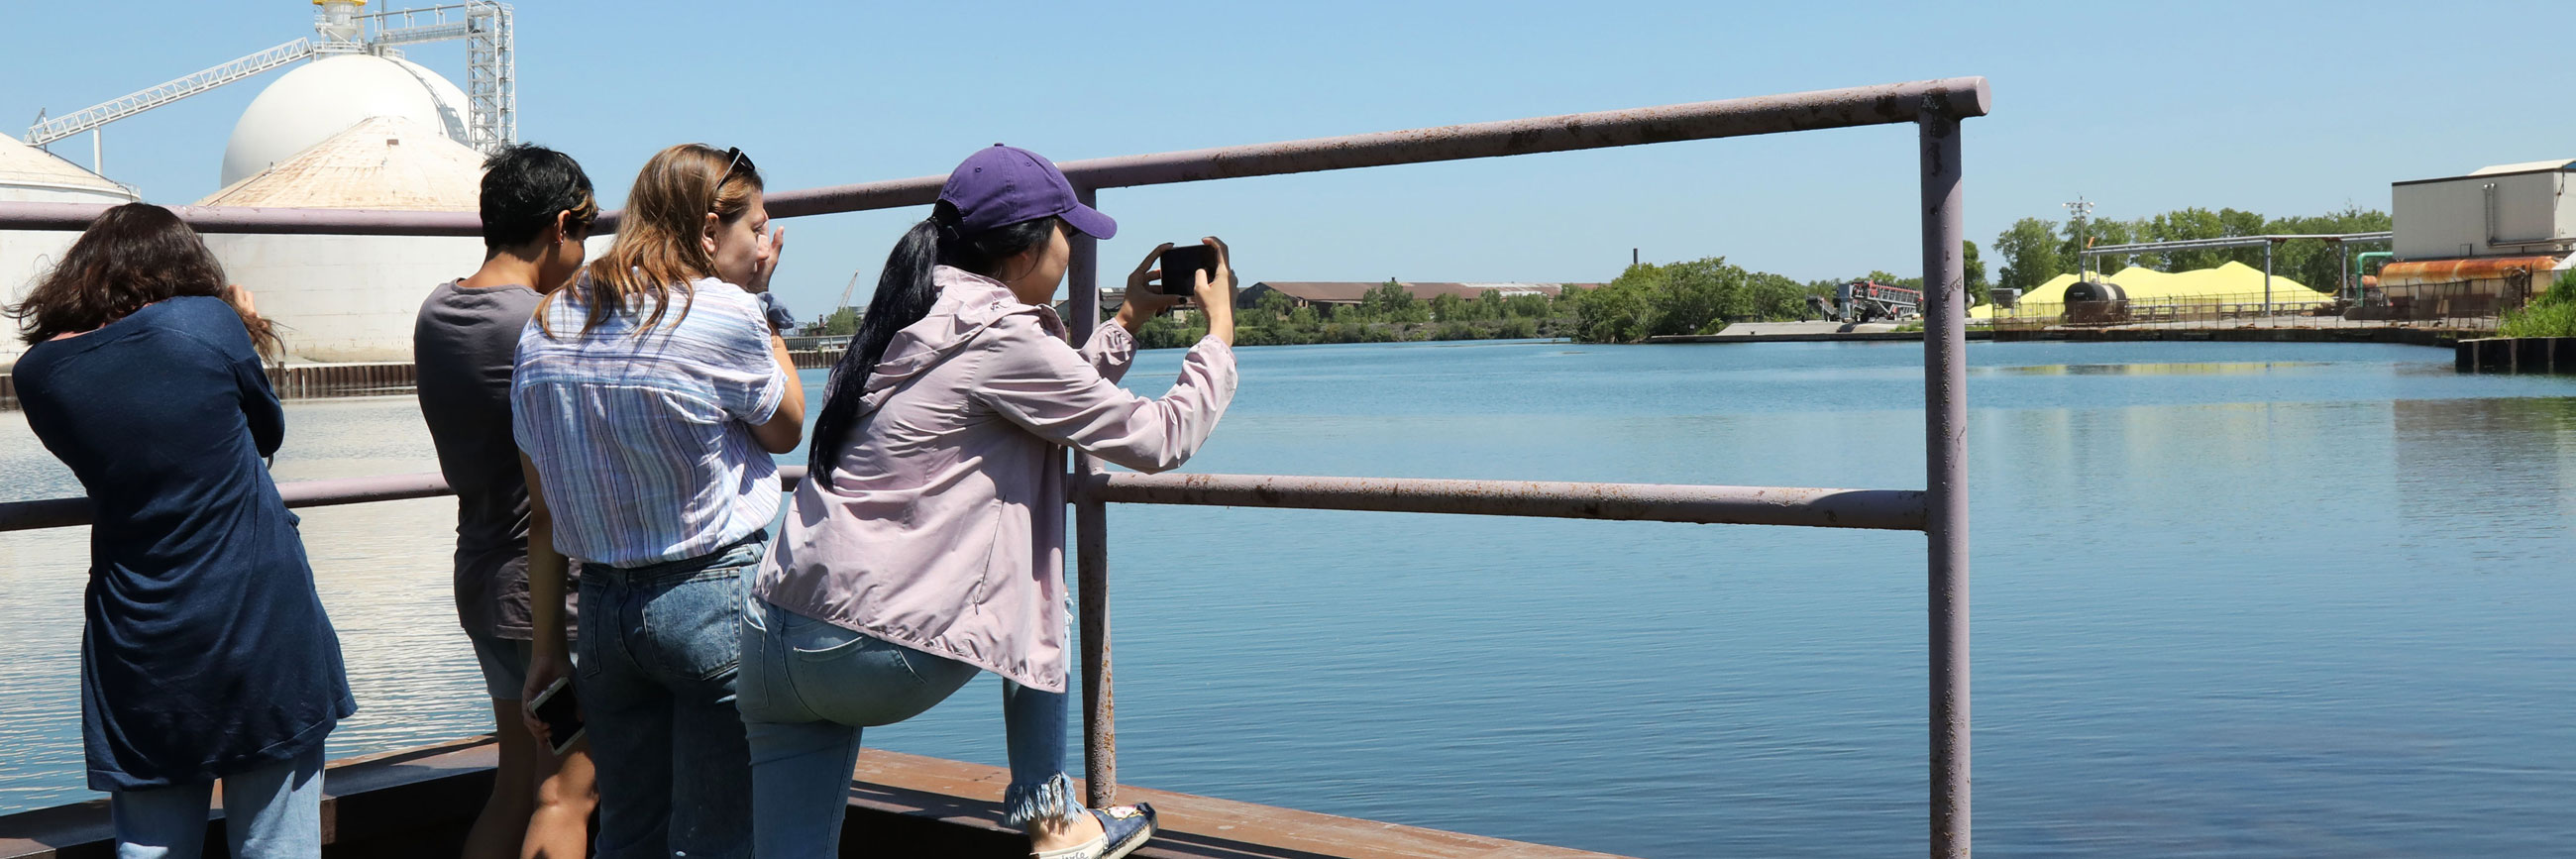 Student photographing a lake